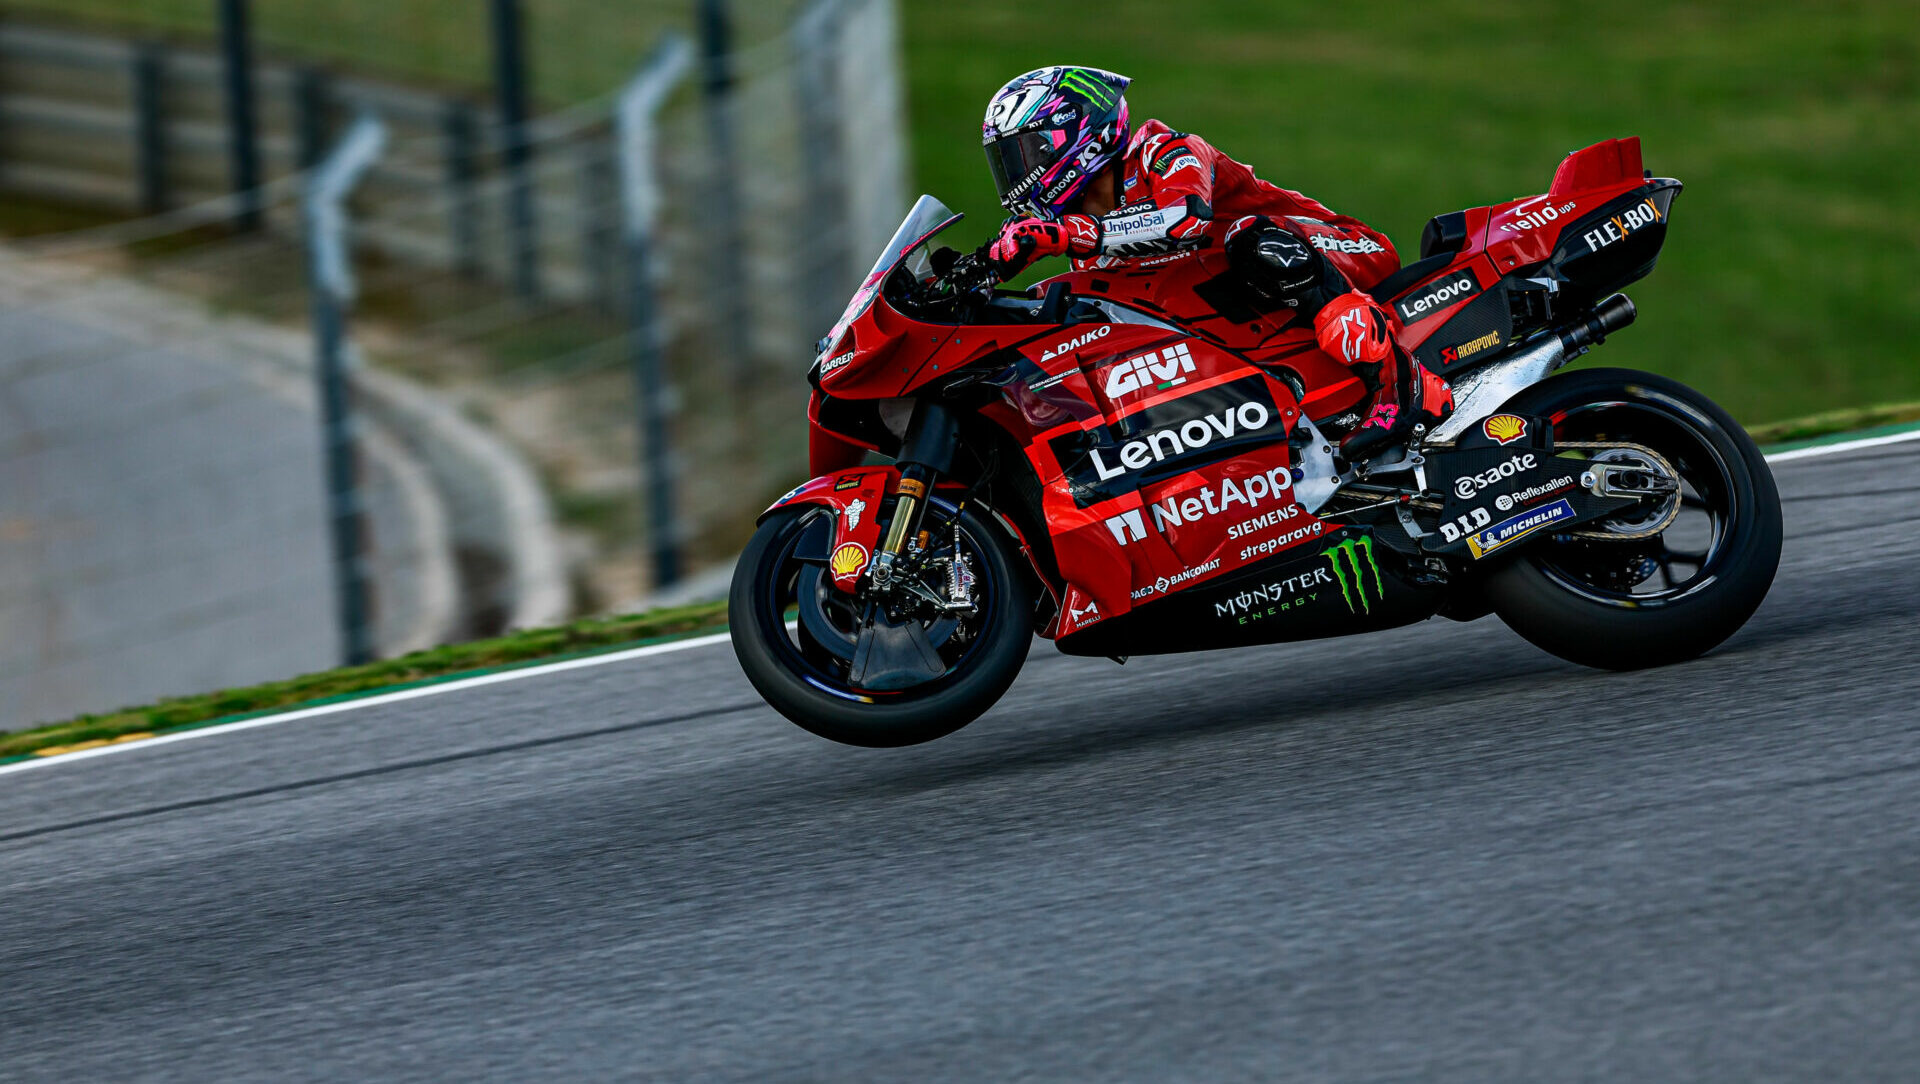 MotoGP: Ducati Lenovo Team Officially Introduced In Italy